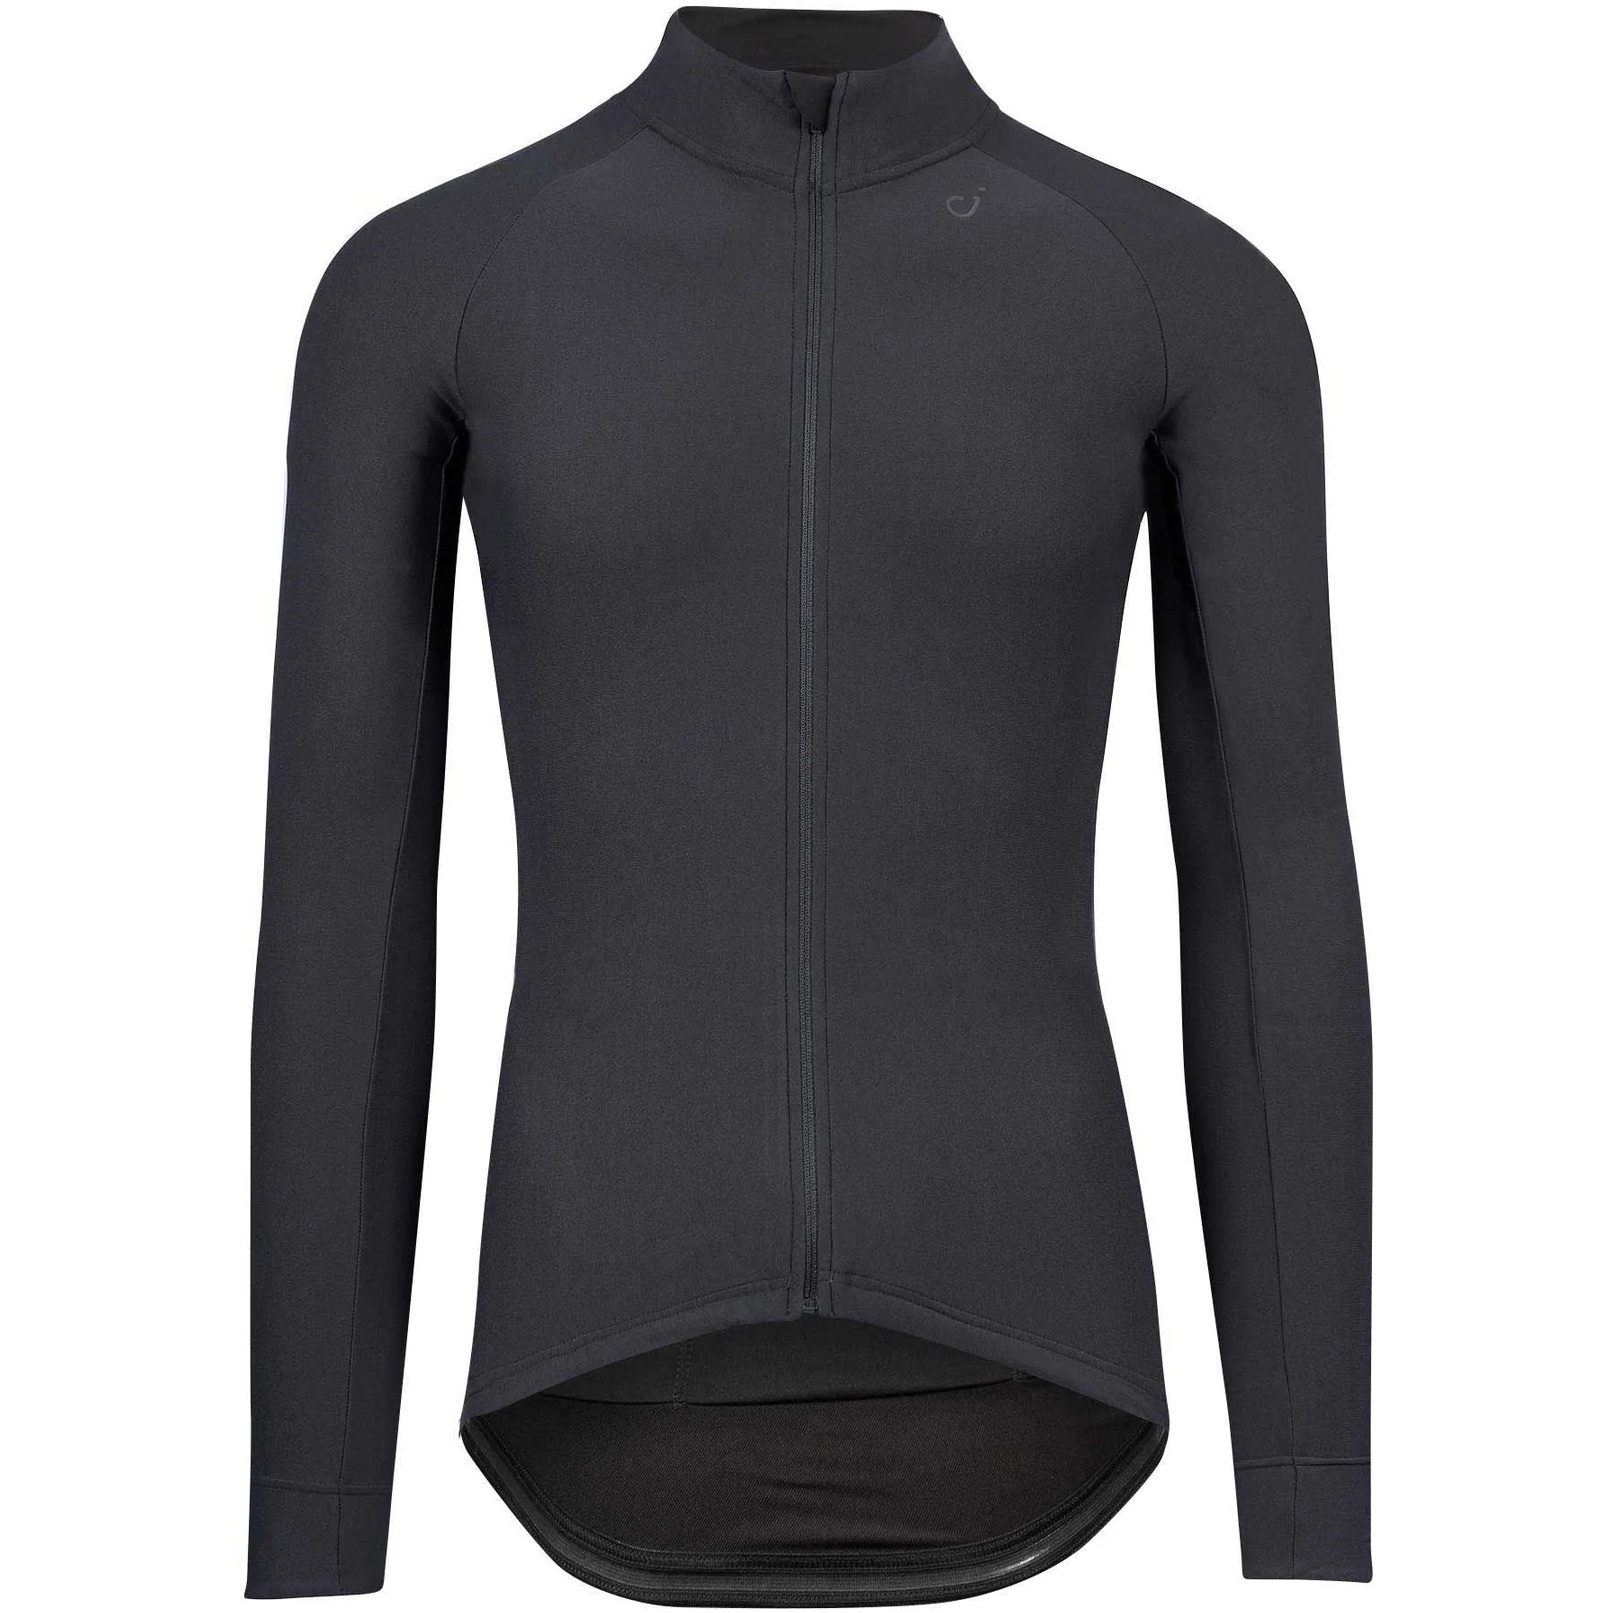 Cycling base layer long sleeve for men & women - Antracite